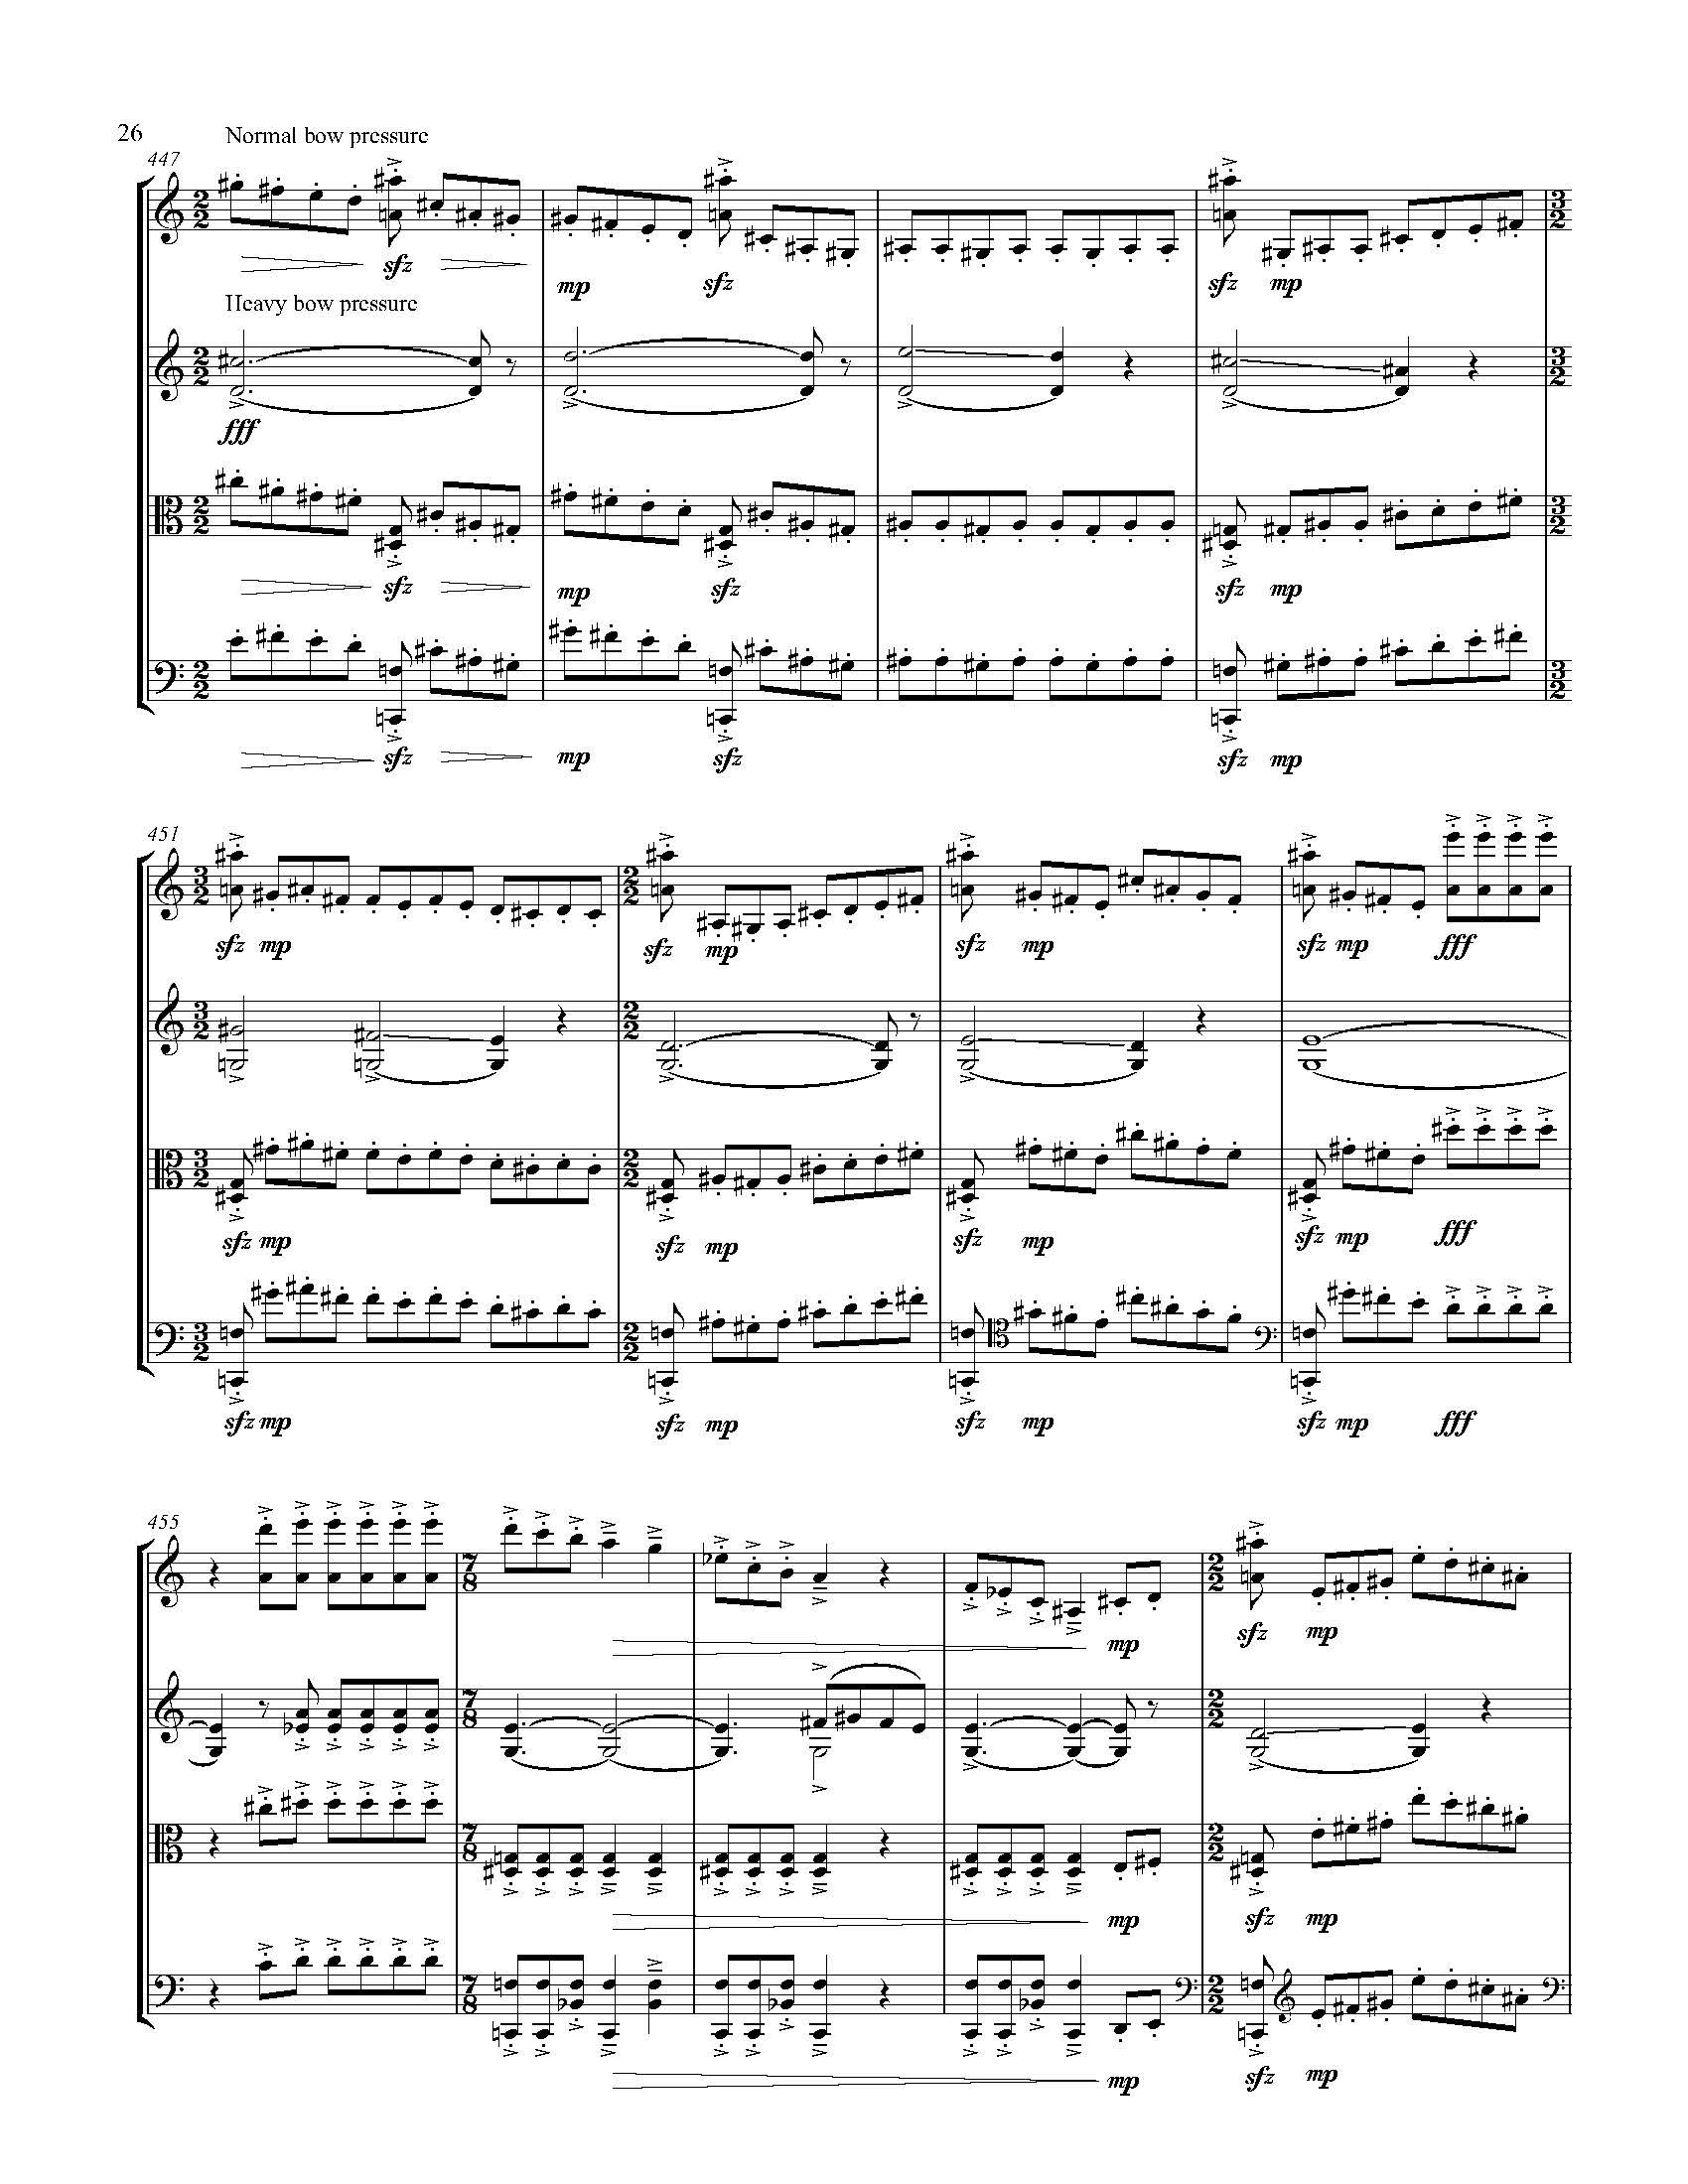 A Country of Vast Designs - Complete Score_Page_32.jpg